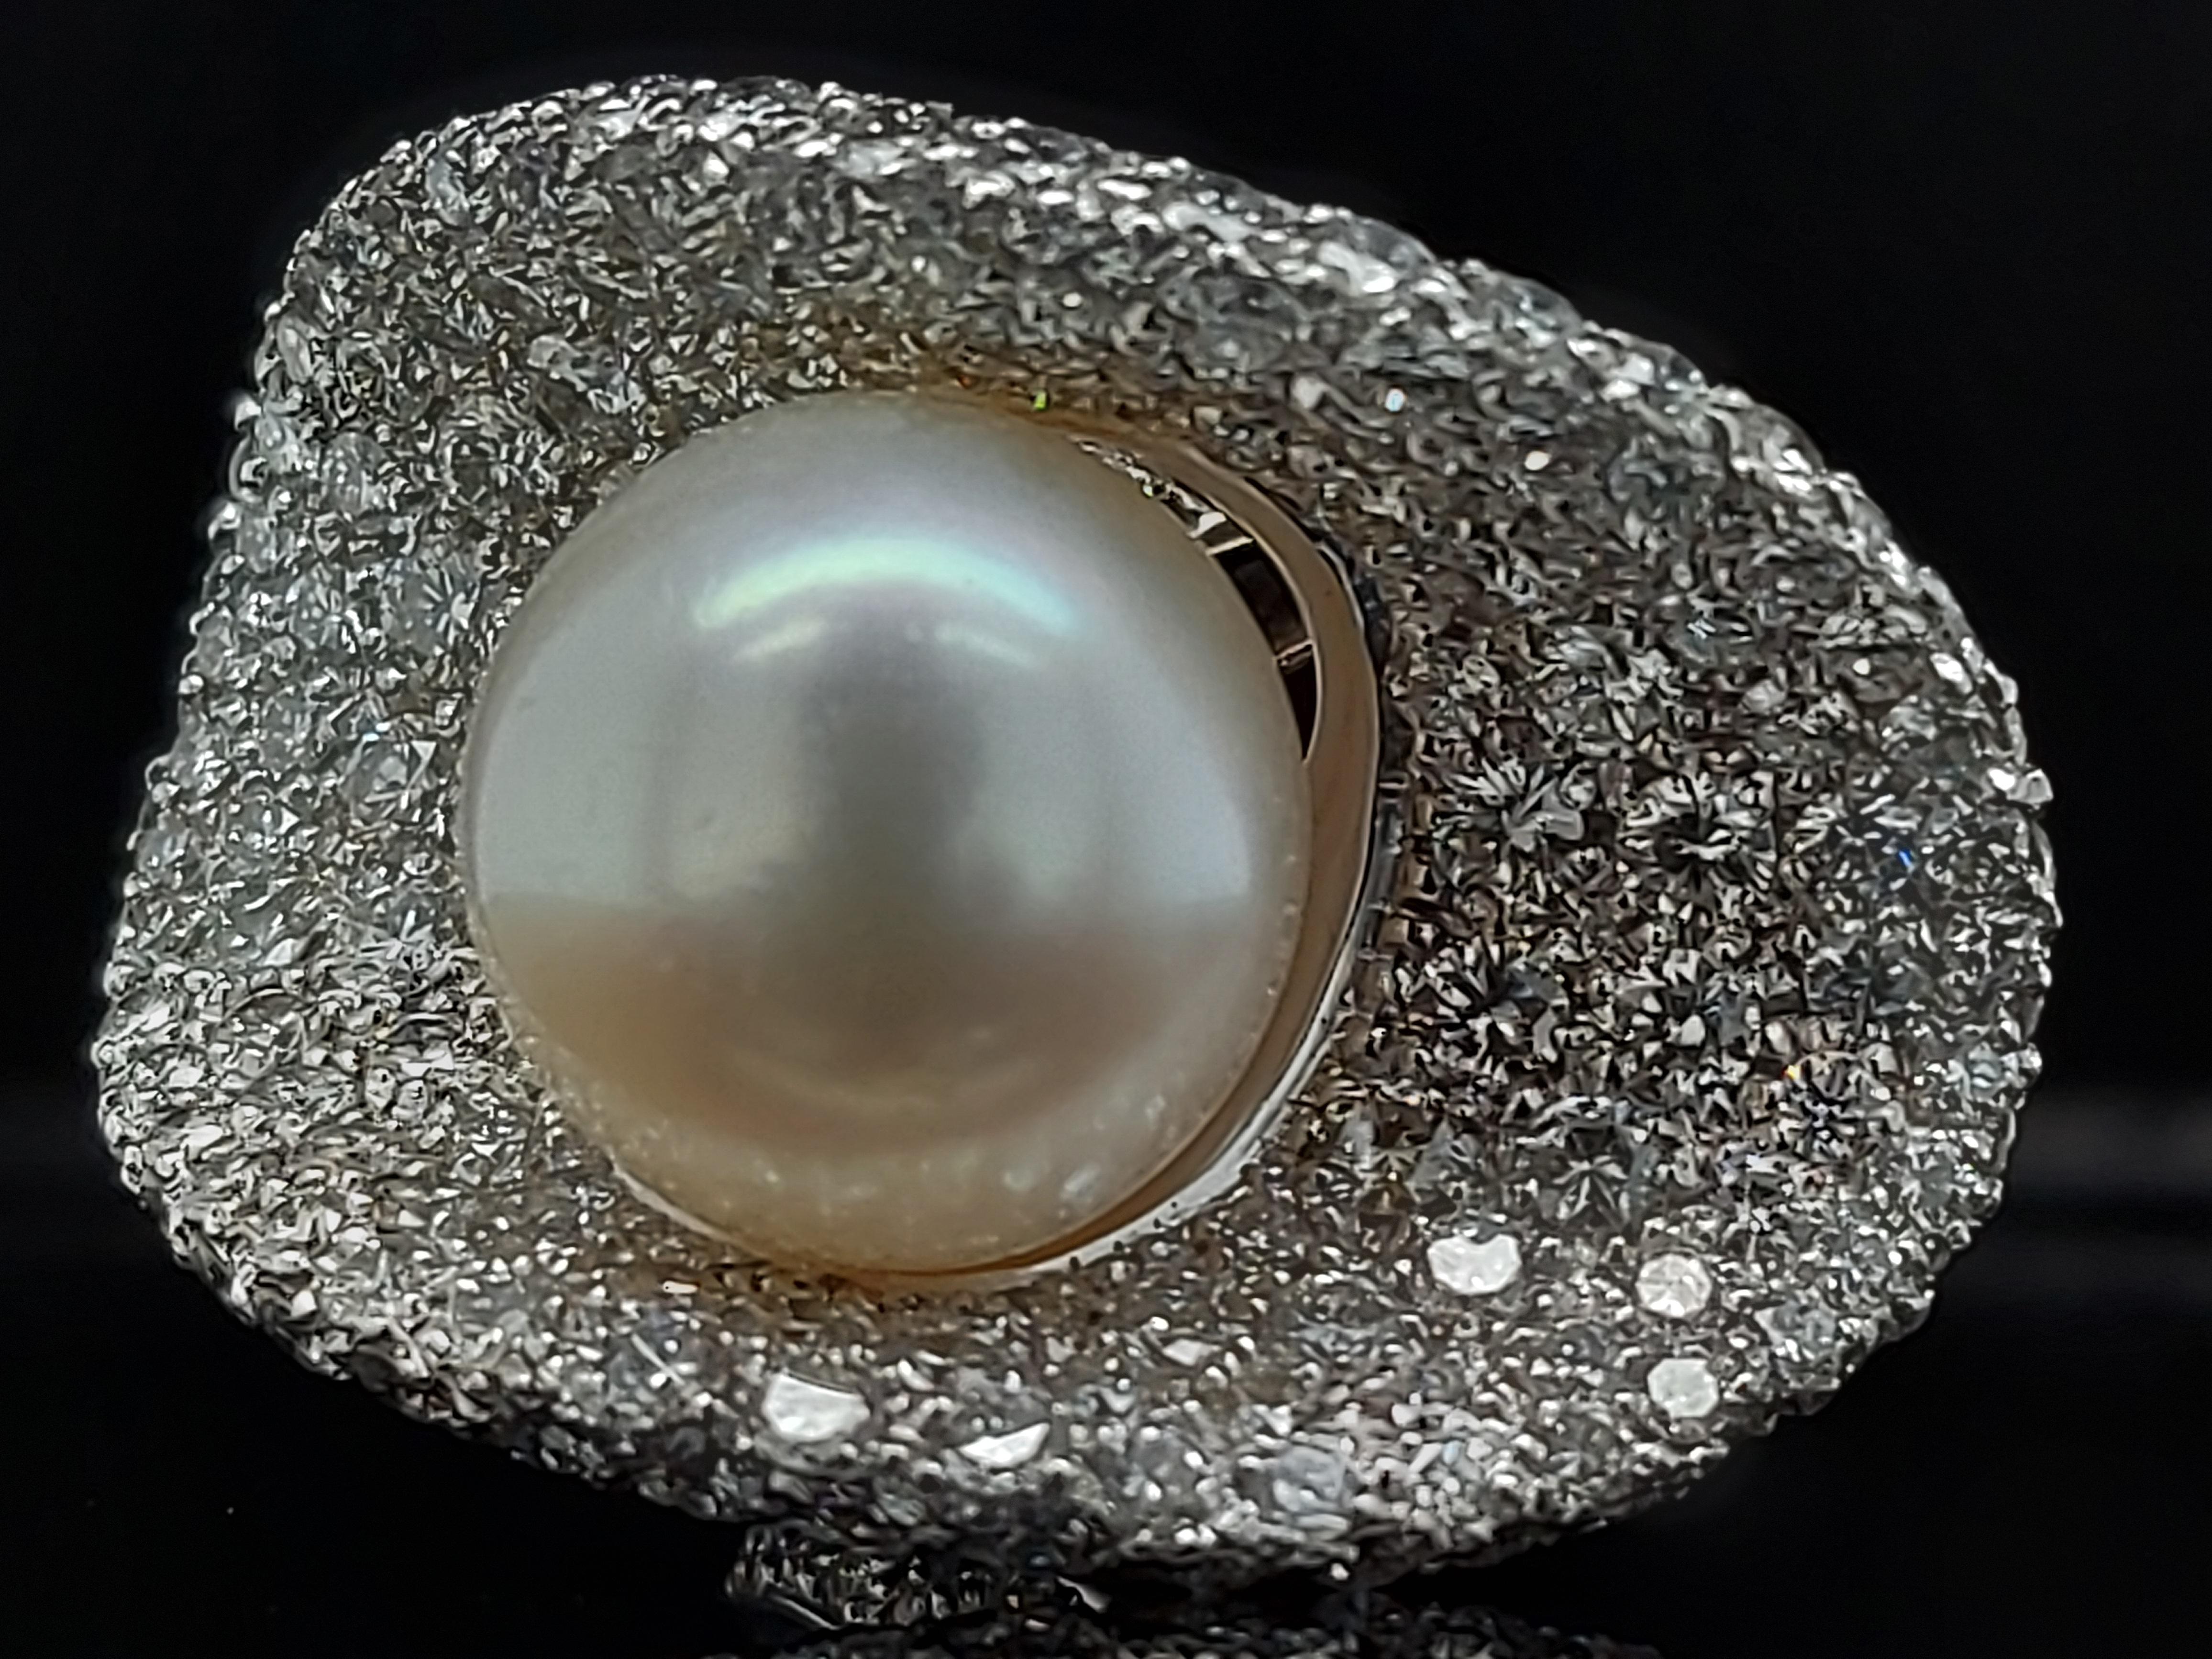 Magnificent 18 Karat White Gold Ring with 14.5 Carat Diamonds and a Big Pearl For Sale 2